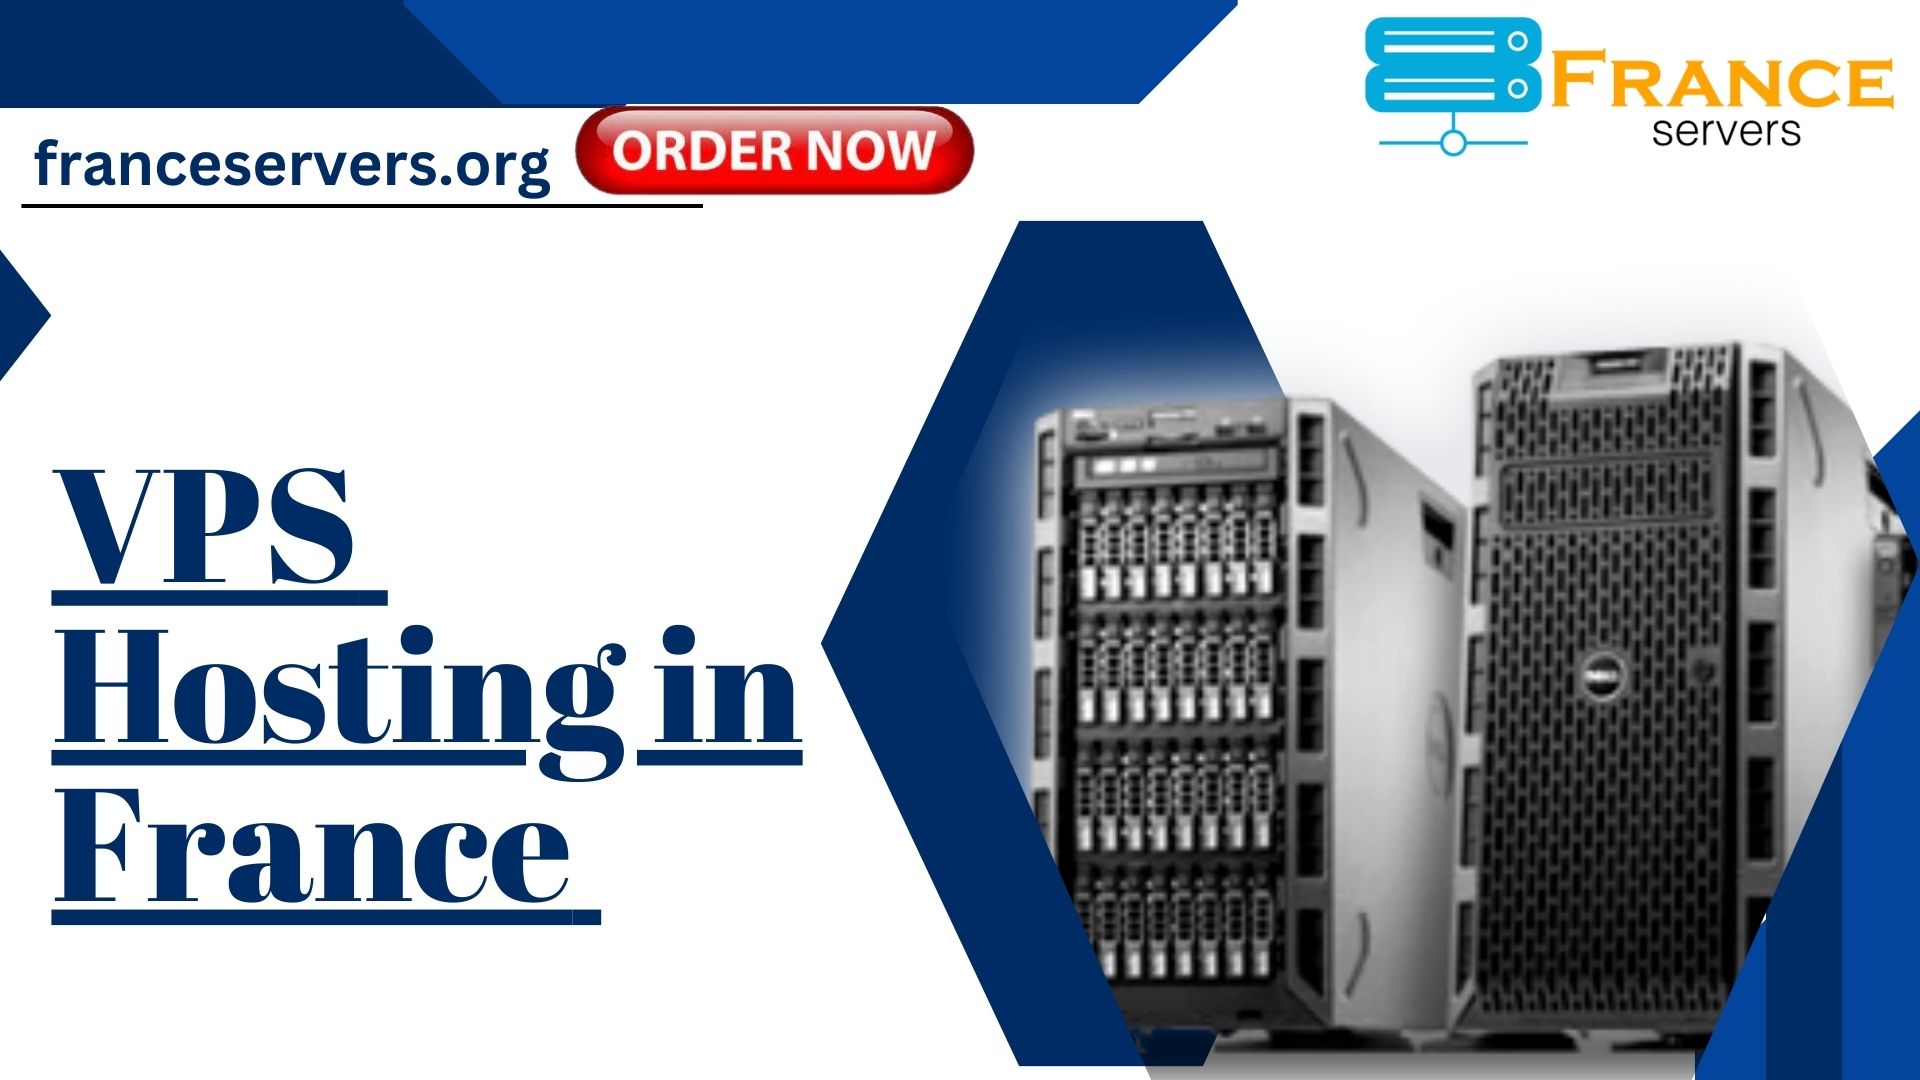 Discover the Power of France VPS Hosting by France